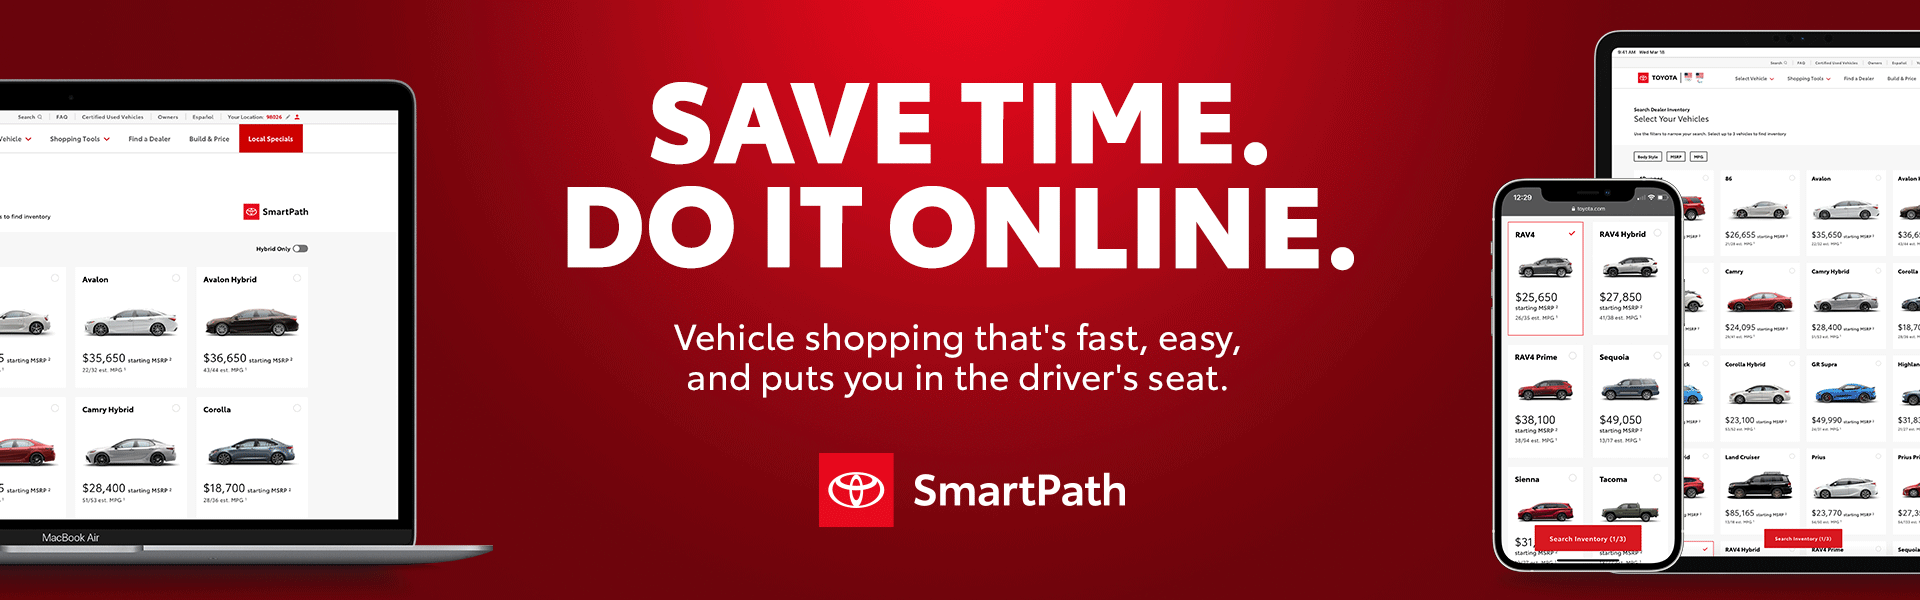 SmartPath - Save Time. Do It Online.